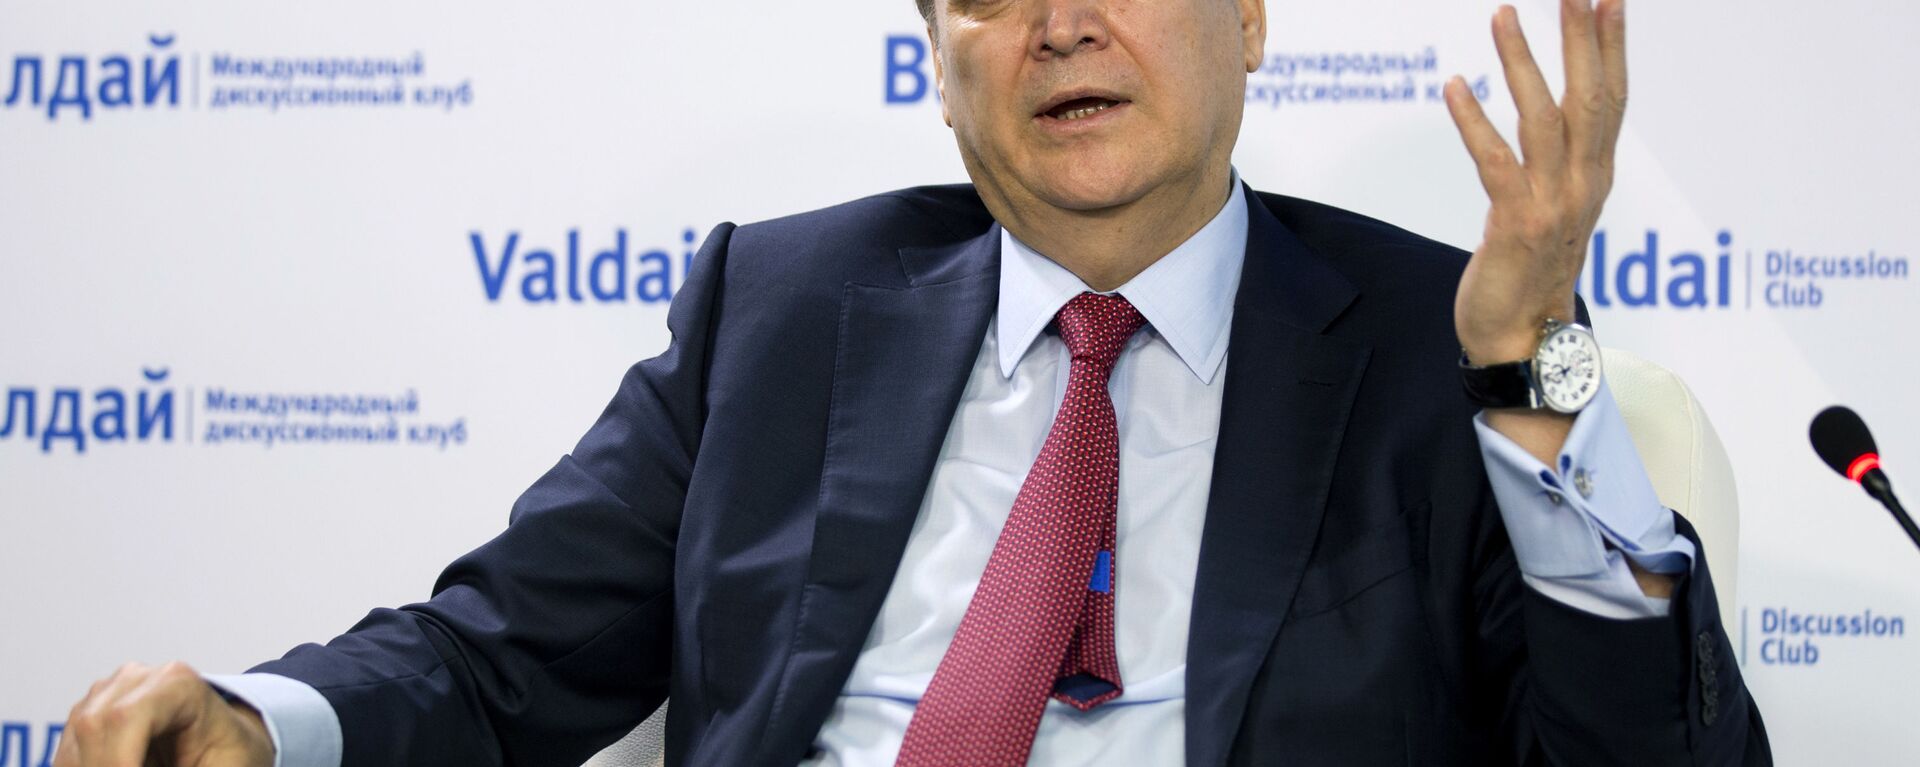 Anatoly Antonov, Russian ambassador to the U.S. gestures while speaking during a round-table discussion on the Trump-Putin summit in Helsinki in Moscow, Russia, Friday, July 20, 2018. - Sputnik International, 1920, 23.02.2022